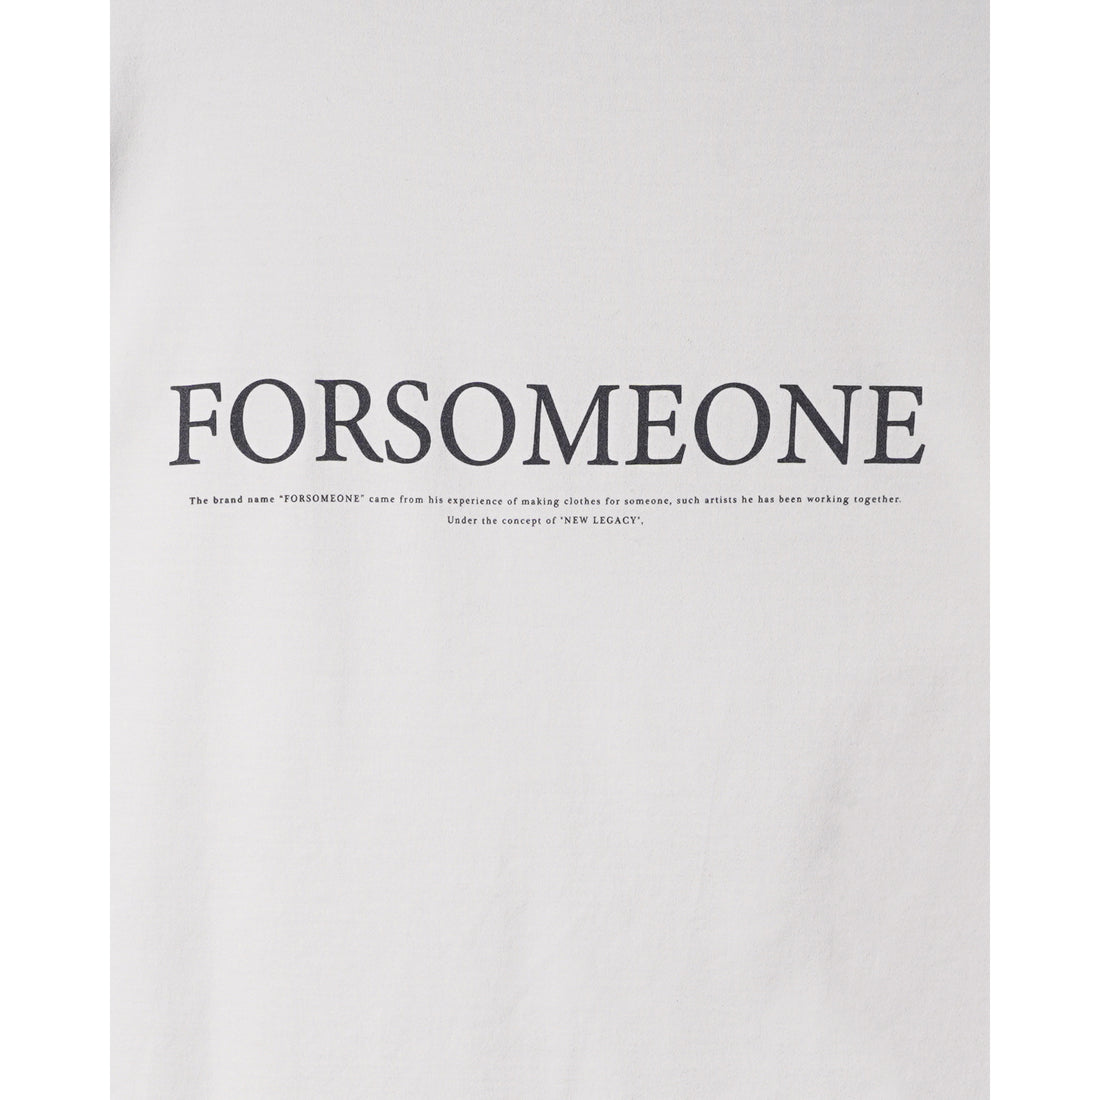 [FORSOMEONE] CL LOGO TEE/OFF WHITE(78000733)